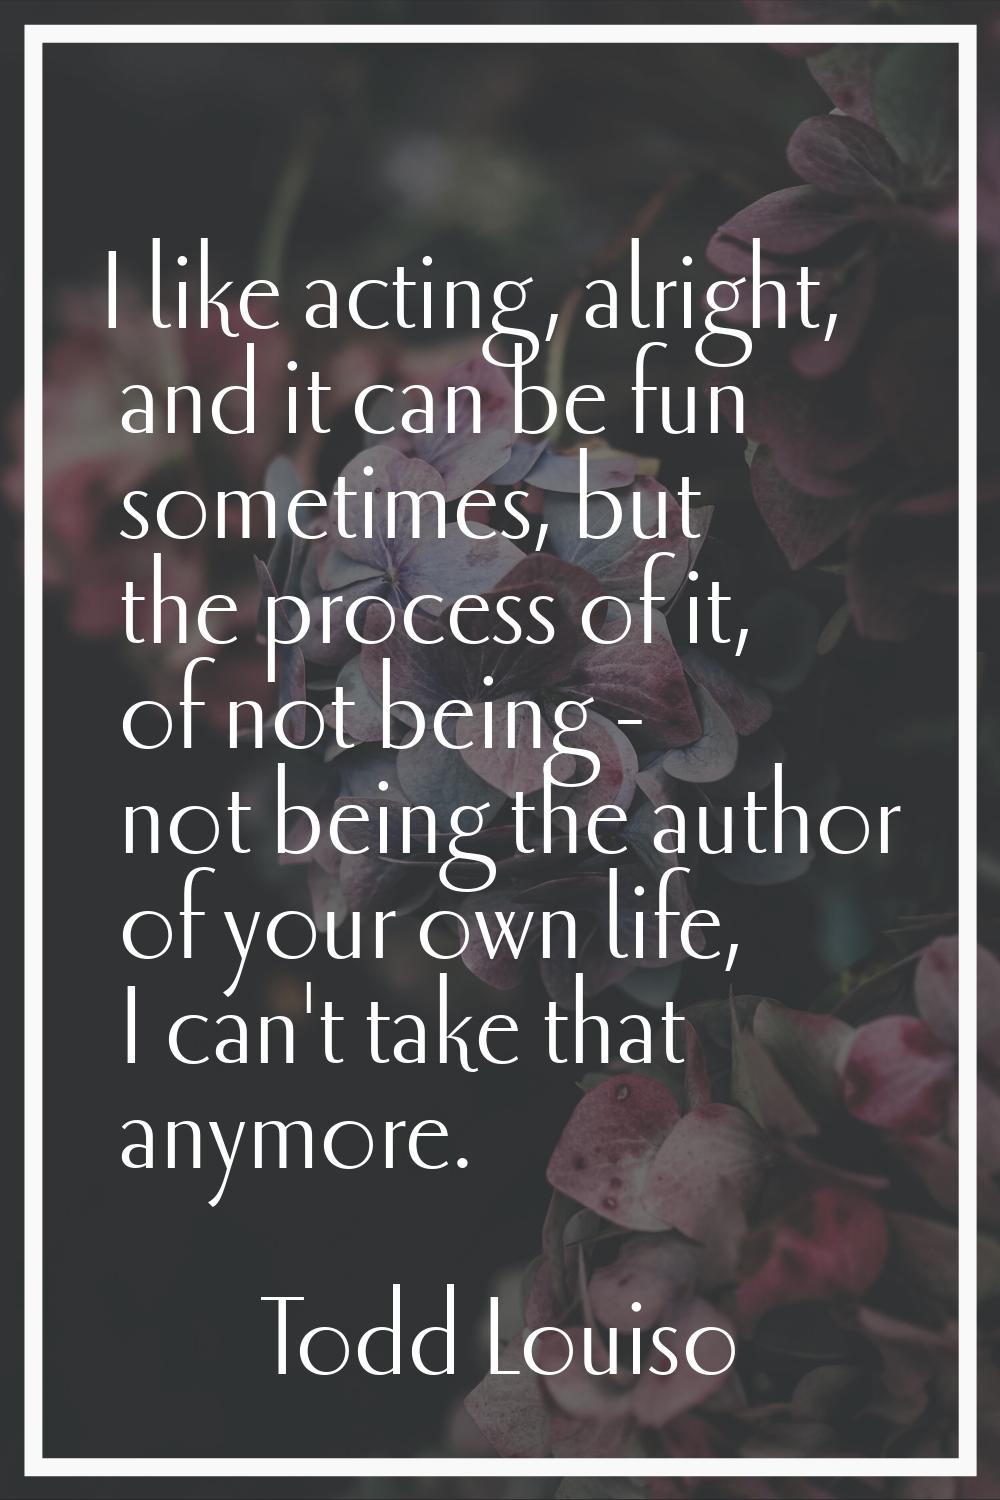 I like acting, alright, and it can be fun sometimes, but the process of it, of not being - not bein